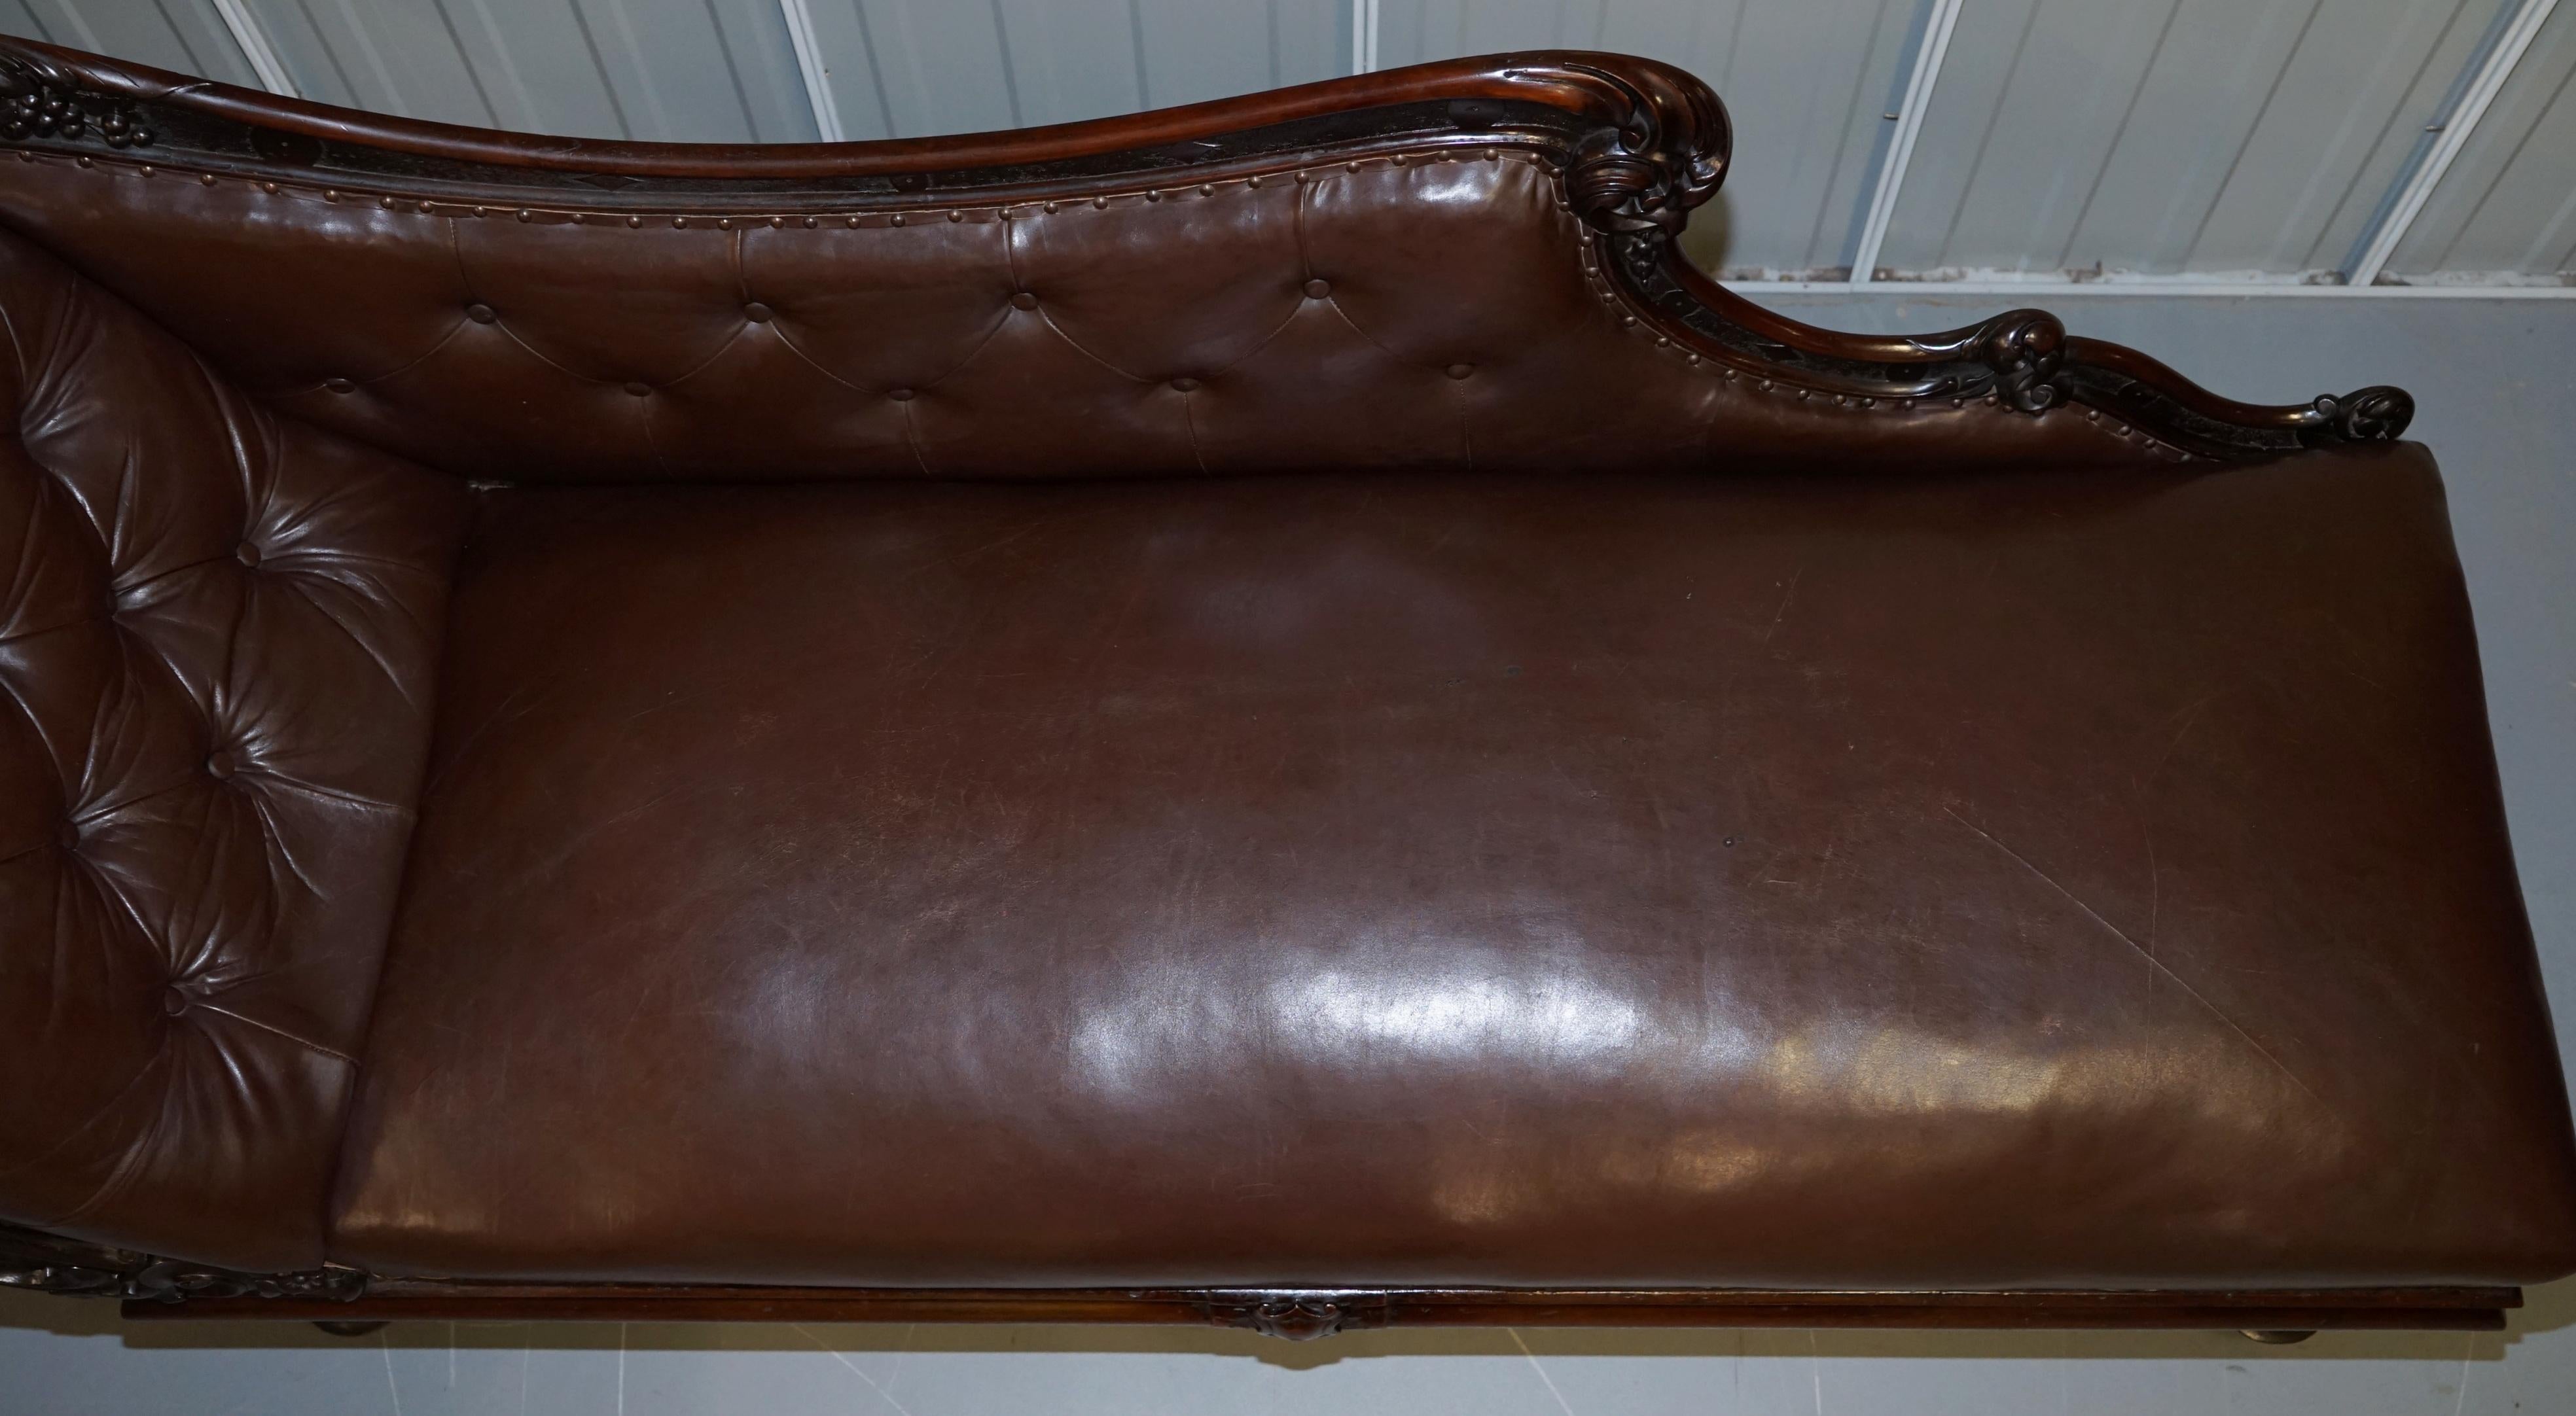 Regency Mahogany & Brown Leather Chesterfield Buttoned Chaise Lounge Sofa Chair 4